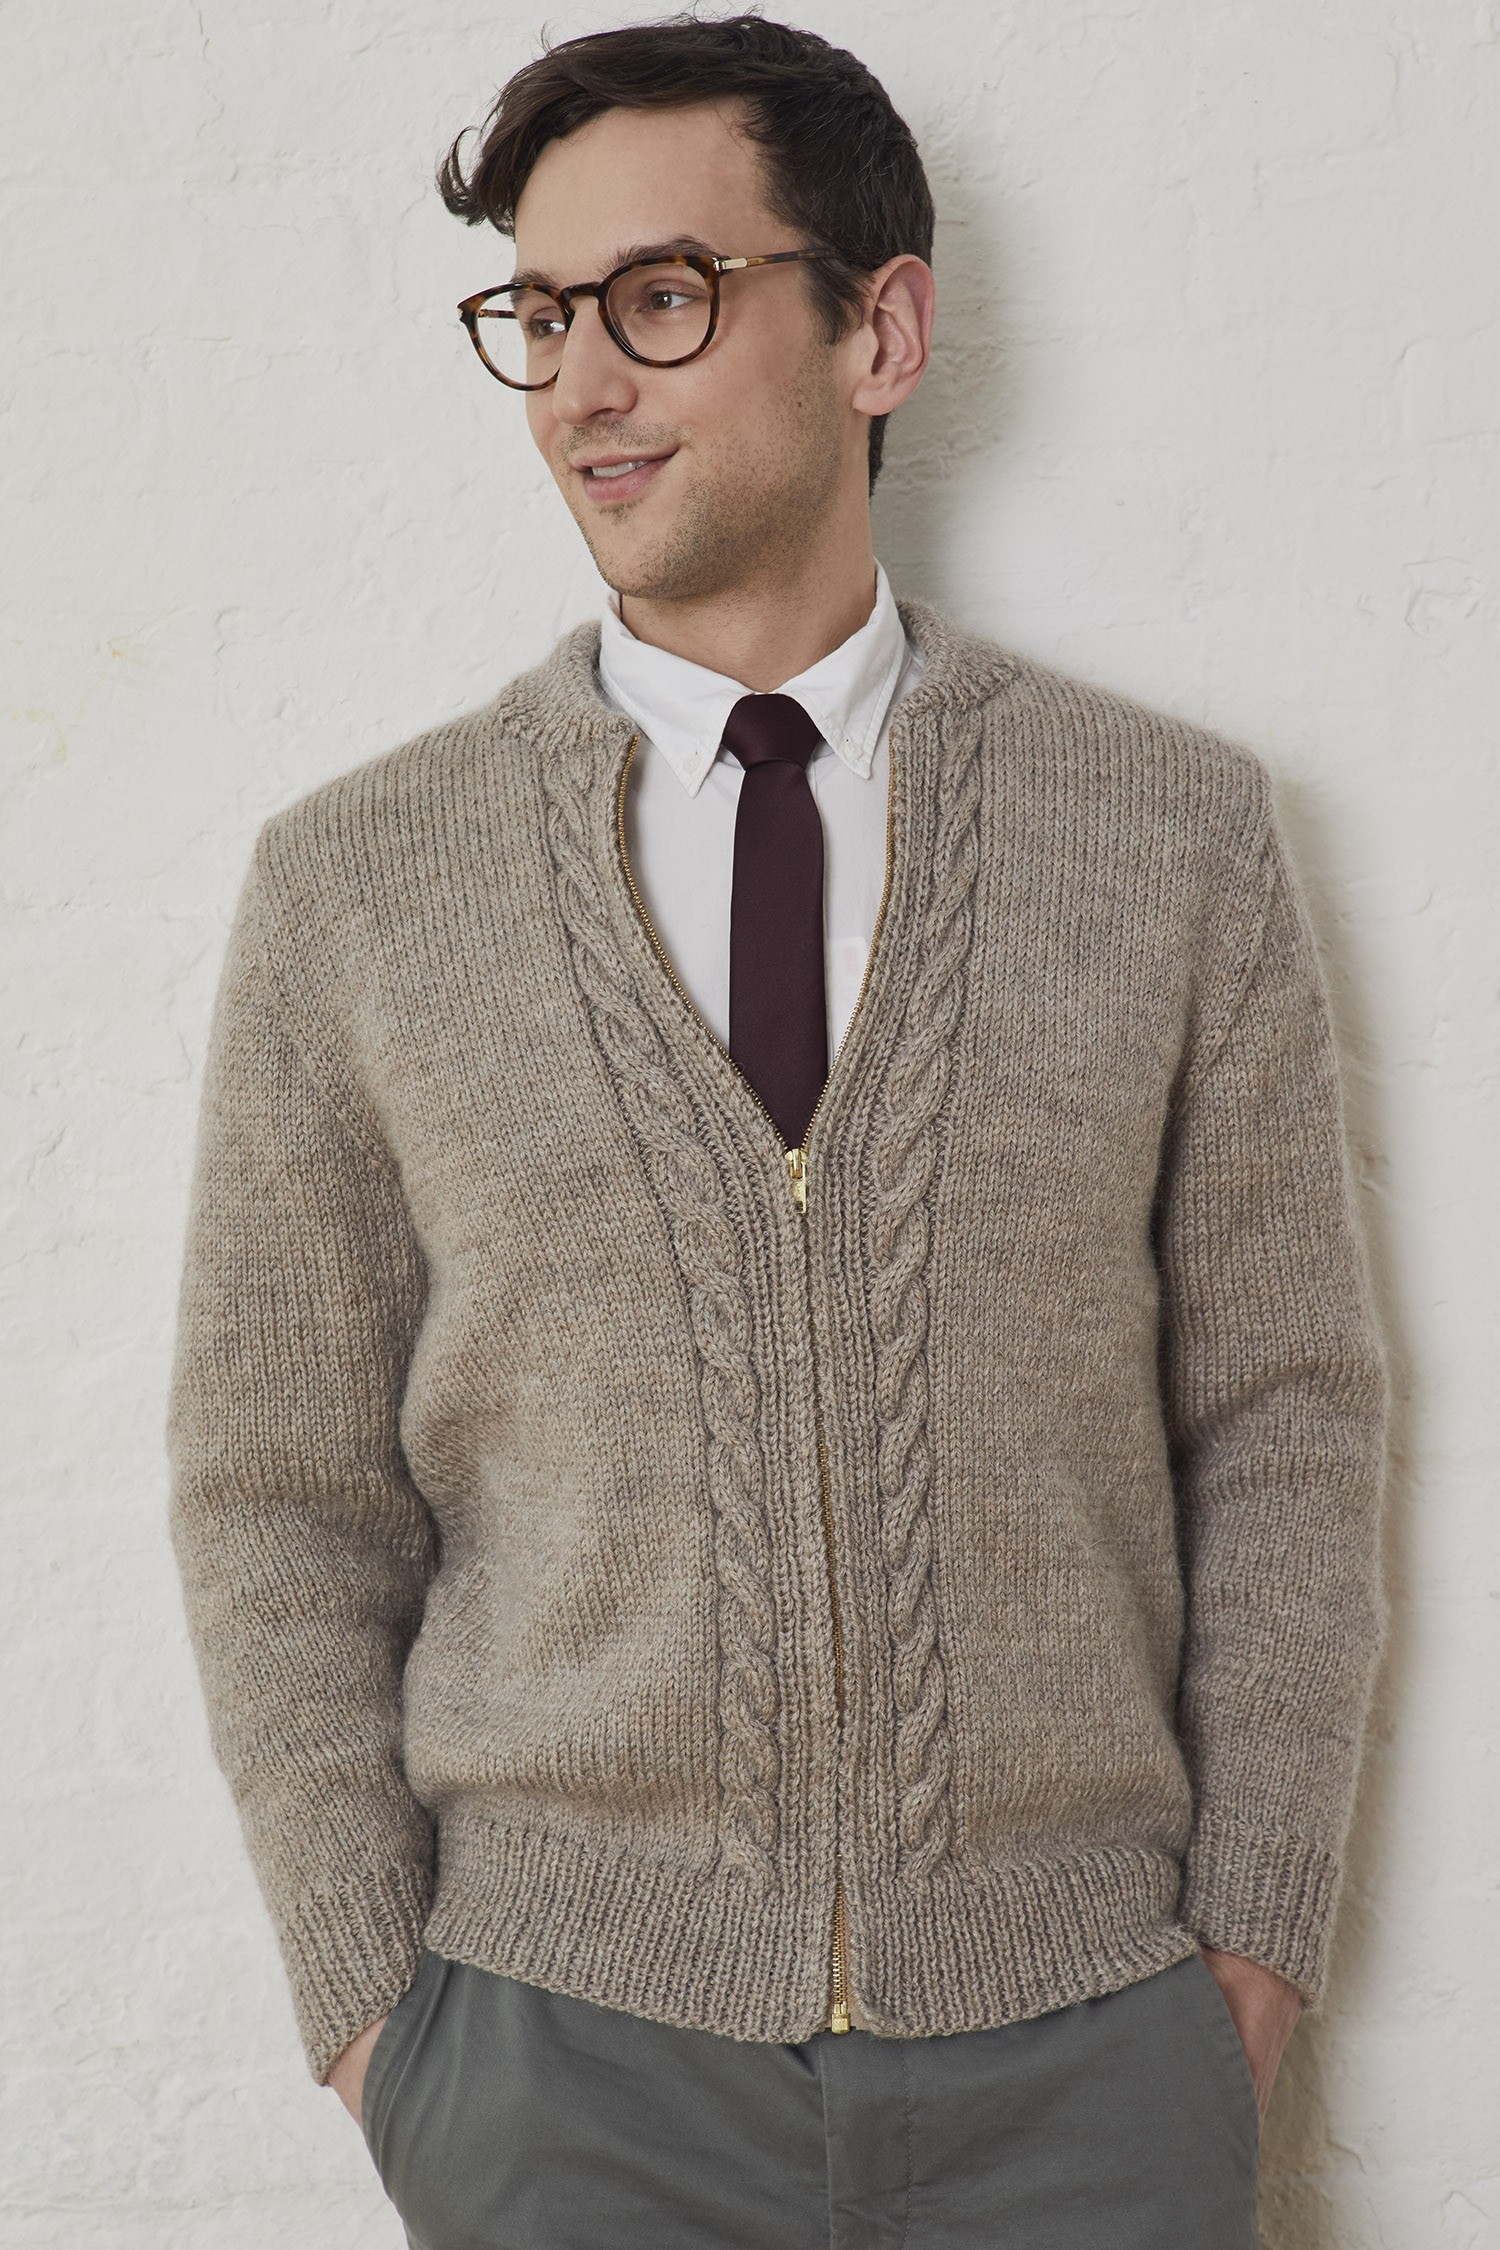 Easy Knitting Pattern For Cardigan